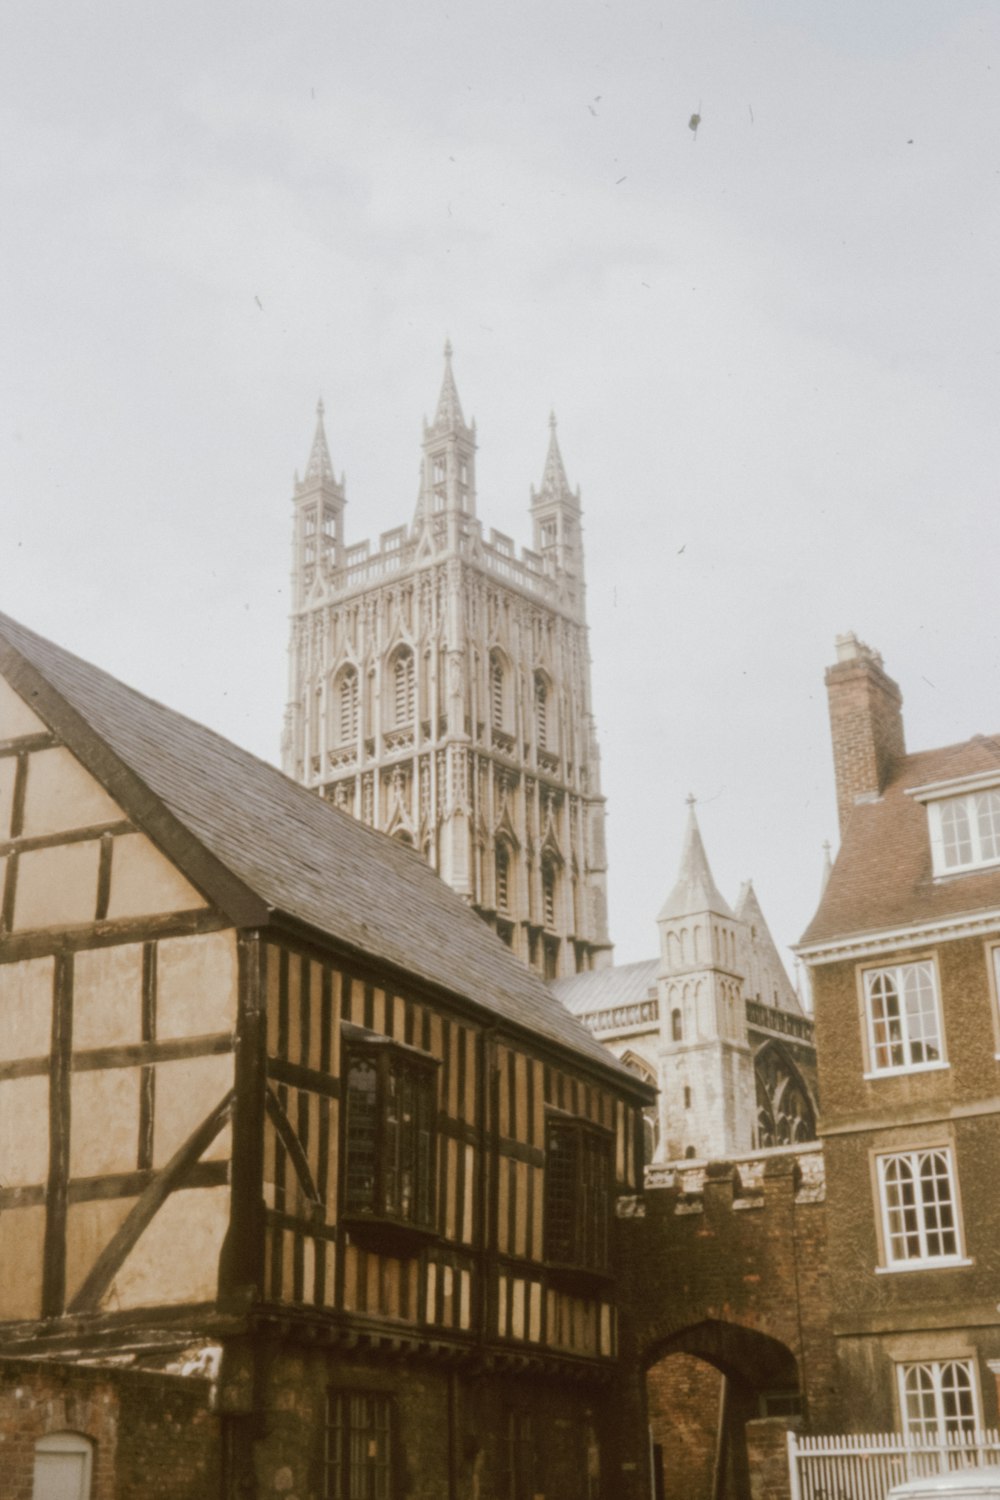 Harry Potter Filming Location 6: Gloucester Cathedral